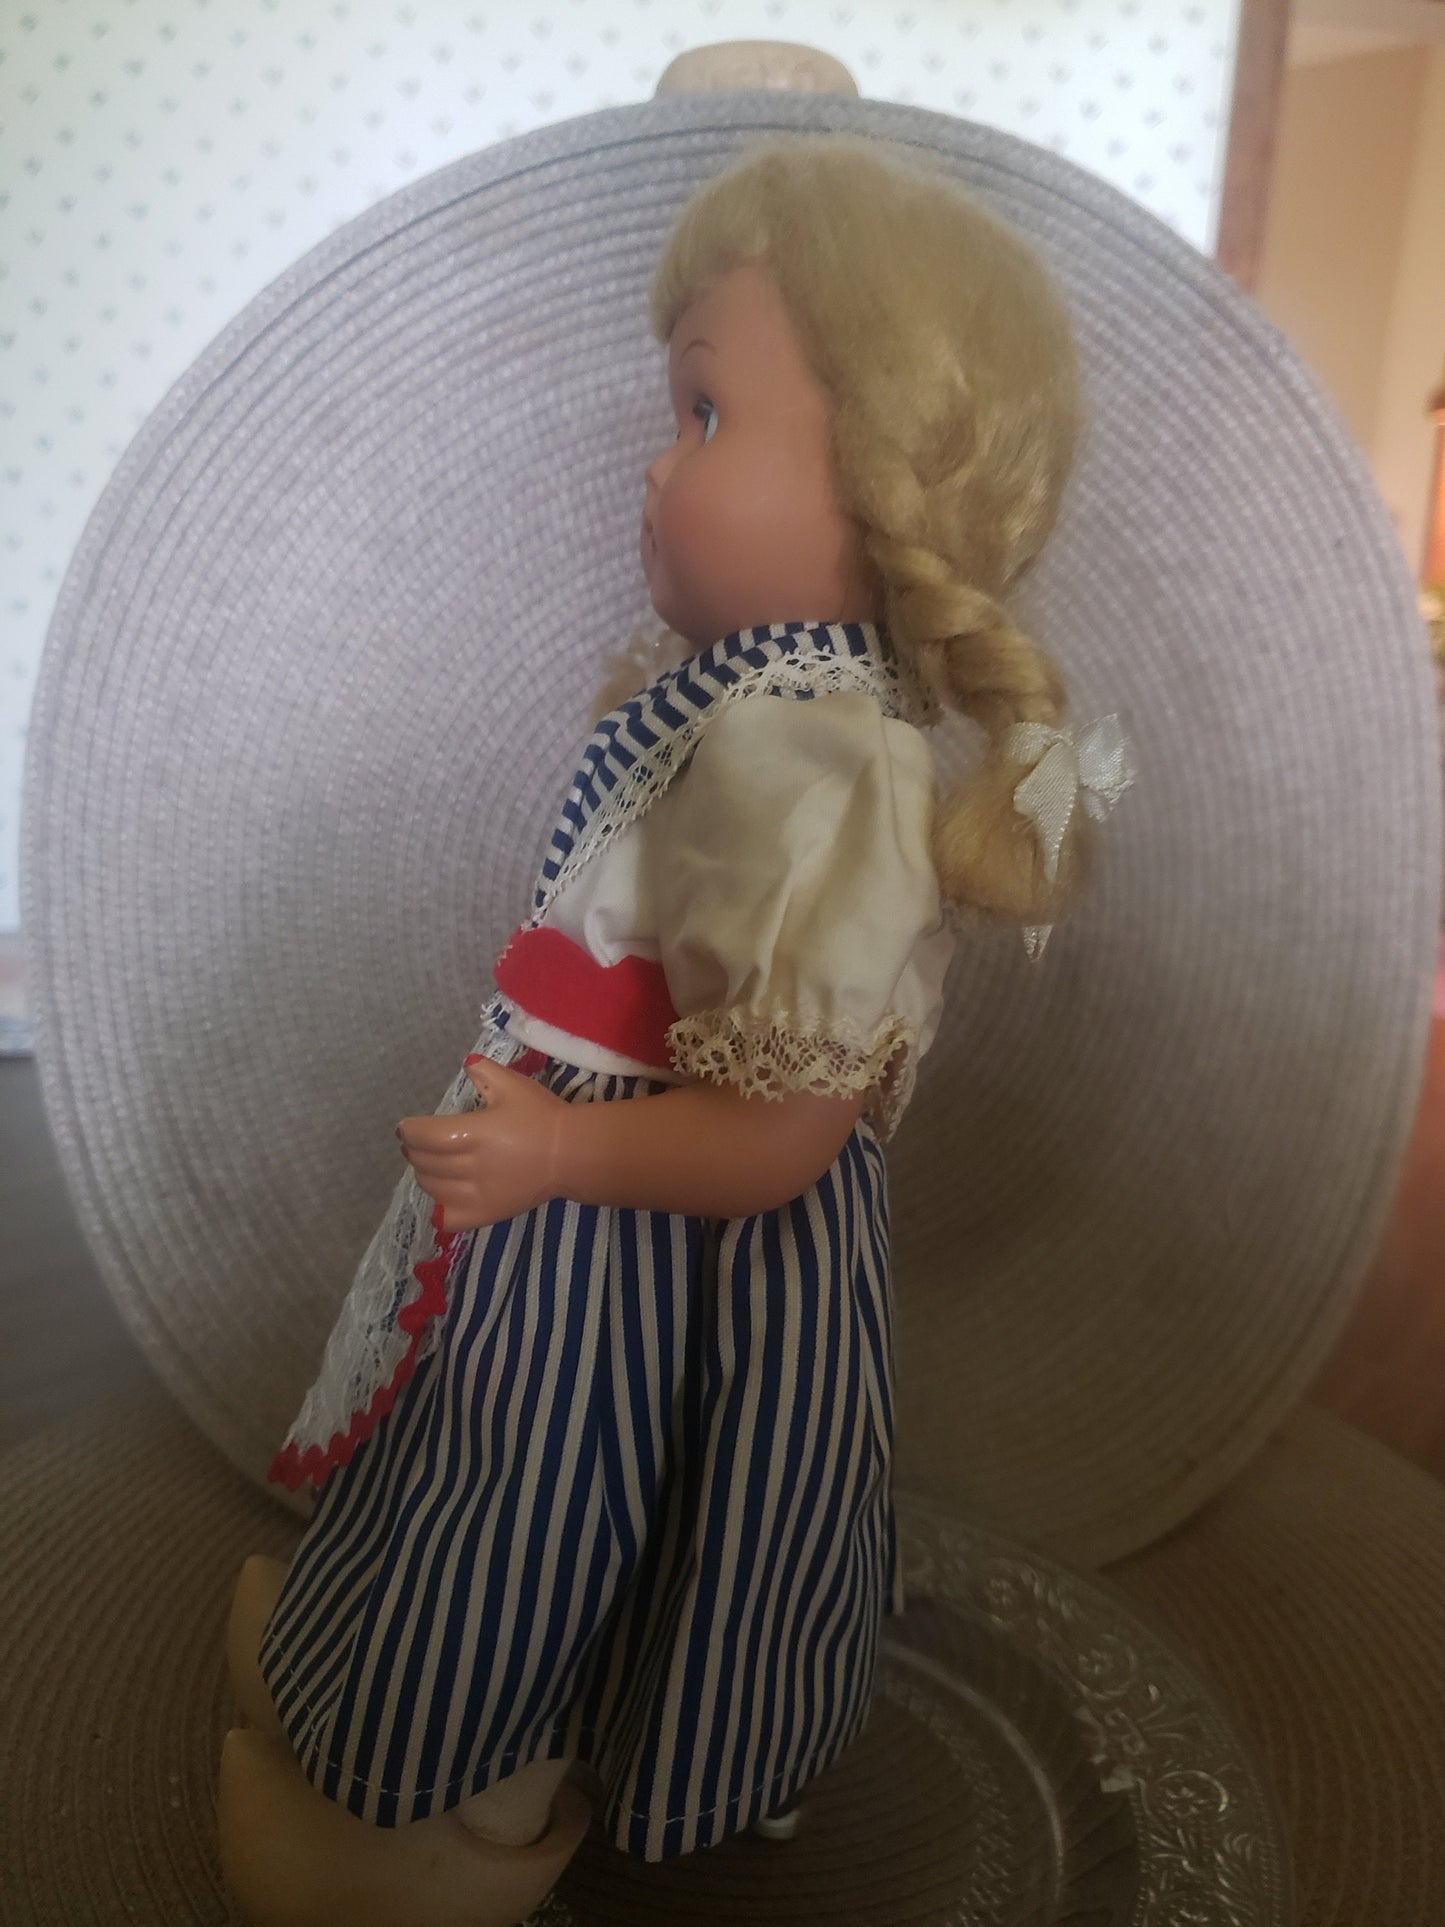 Vintage Dutch/Holland Celluloid Doll with Wooden Clogs